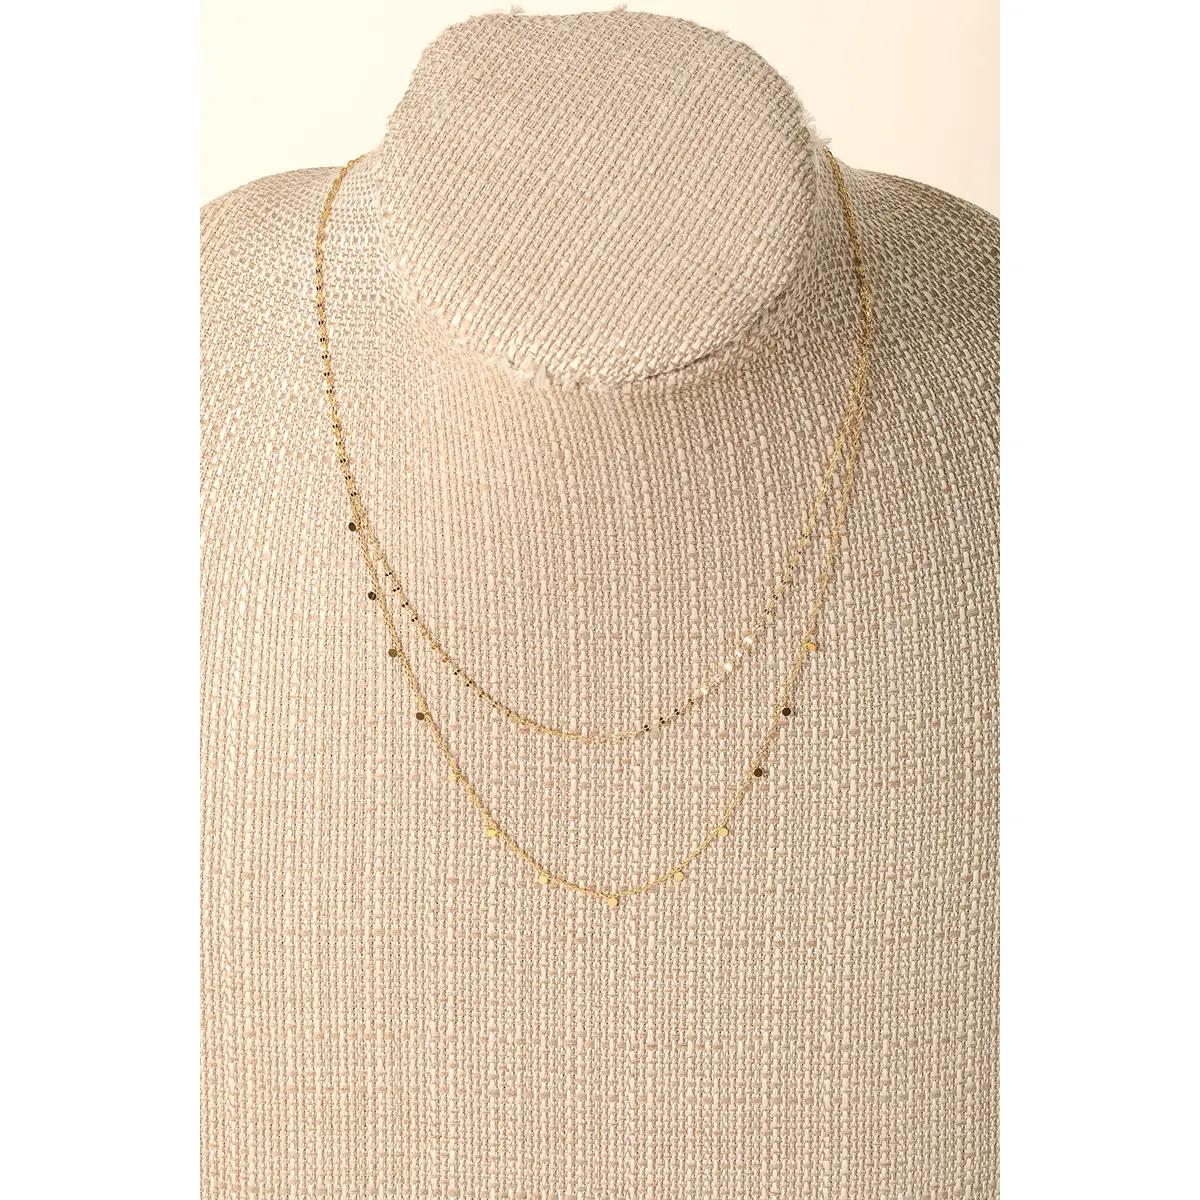 Dainty Layered Coin Choker Necklace - GOLD